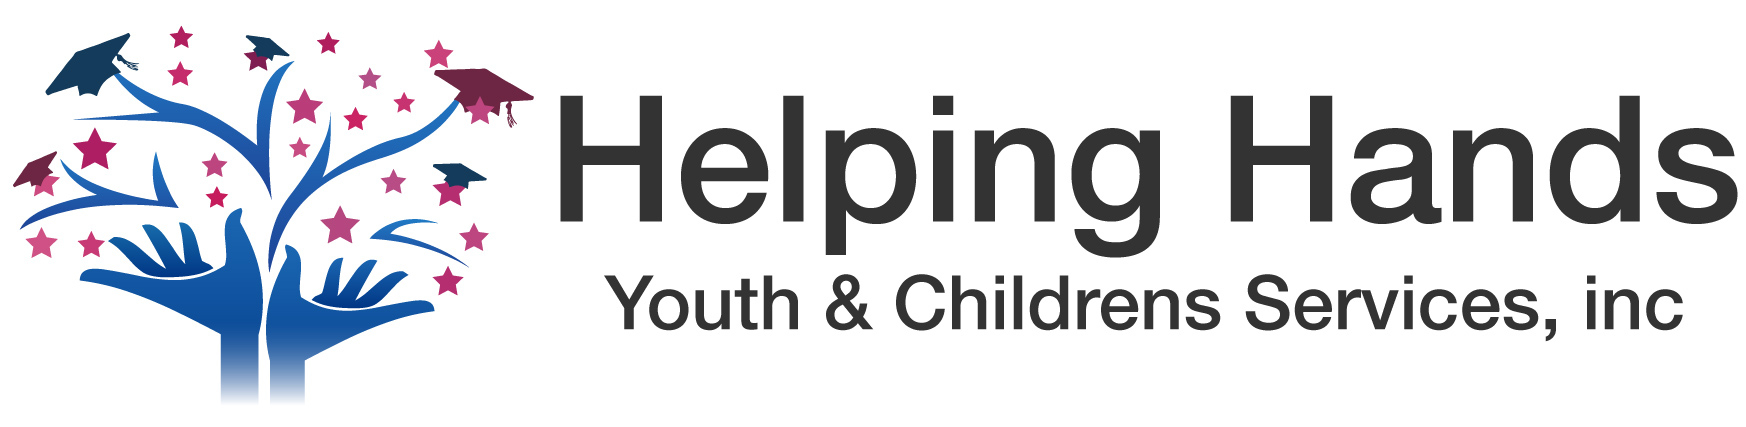 Helping Hands Youth & Childrens Services, Inc.